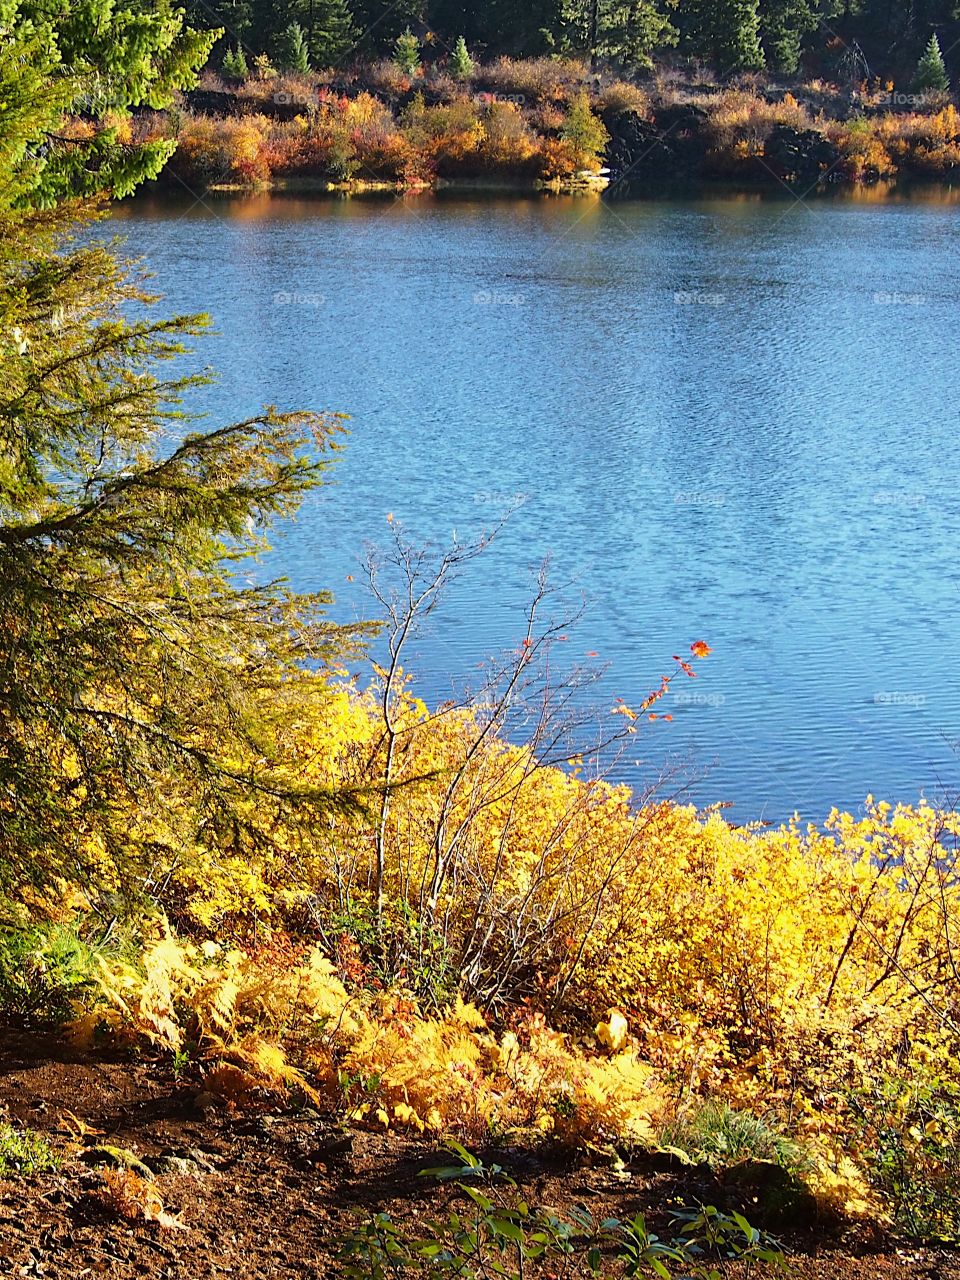 The beautiful waters of Clear Lake with shores covered in foliage in fall colors in the forests of Oregon on a beautiful autumn day. 